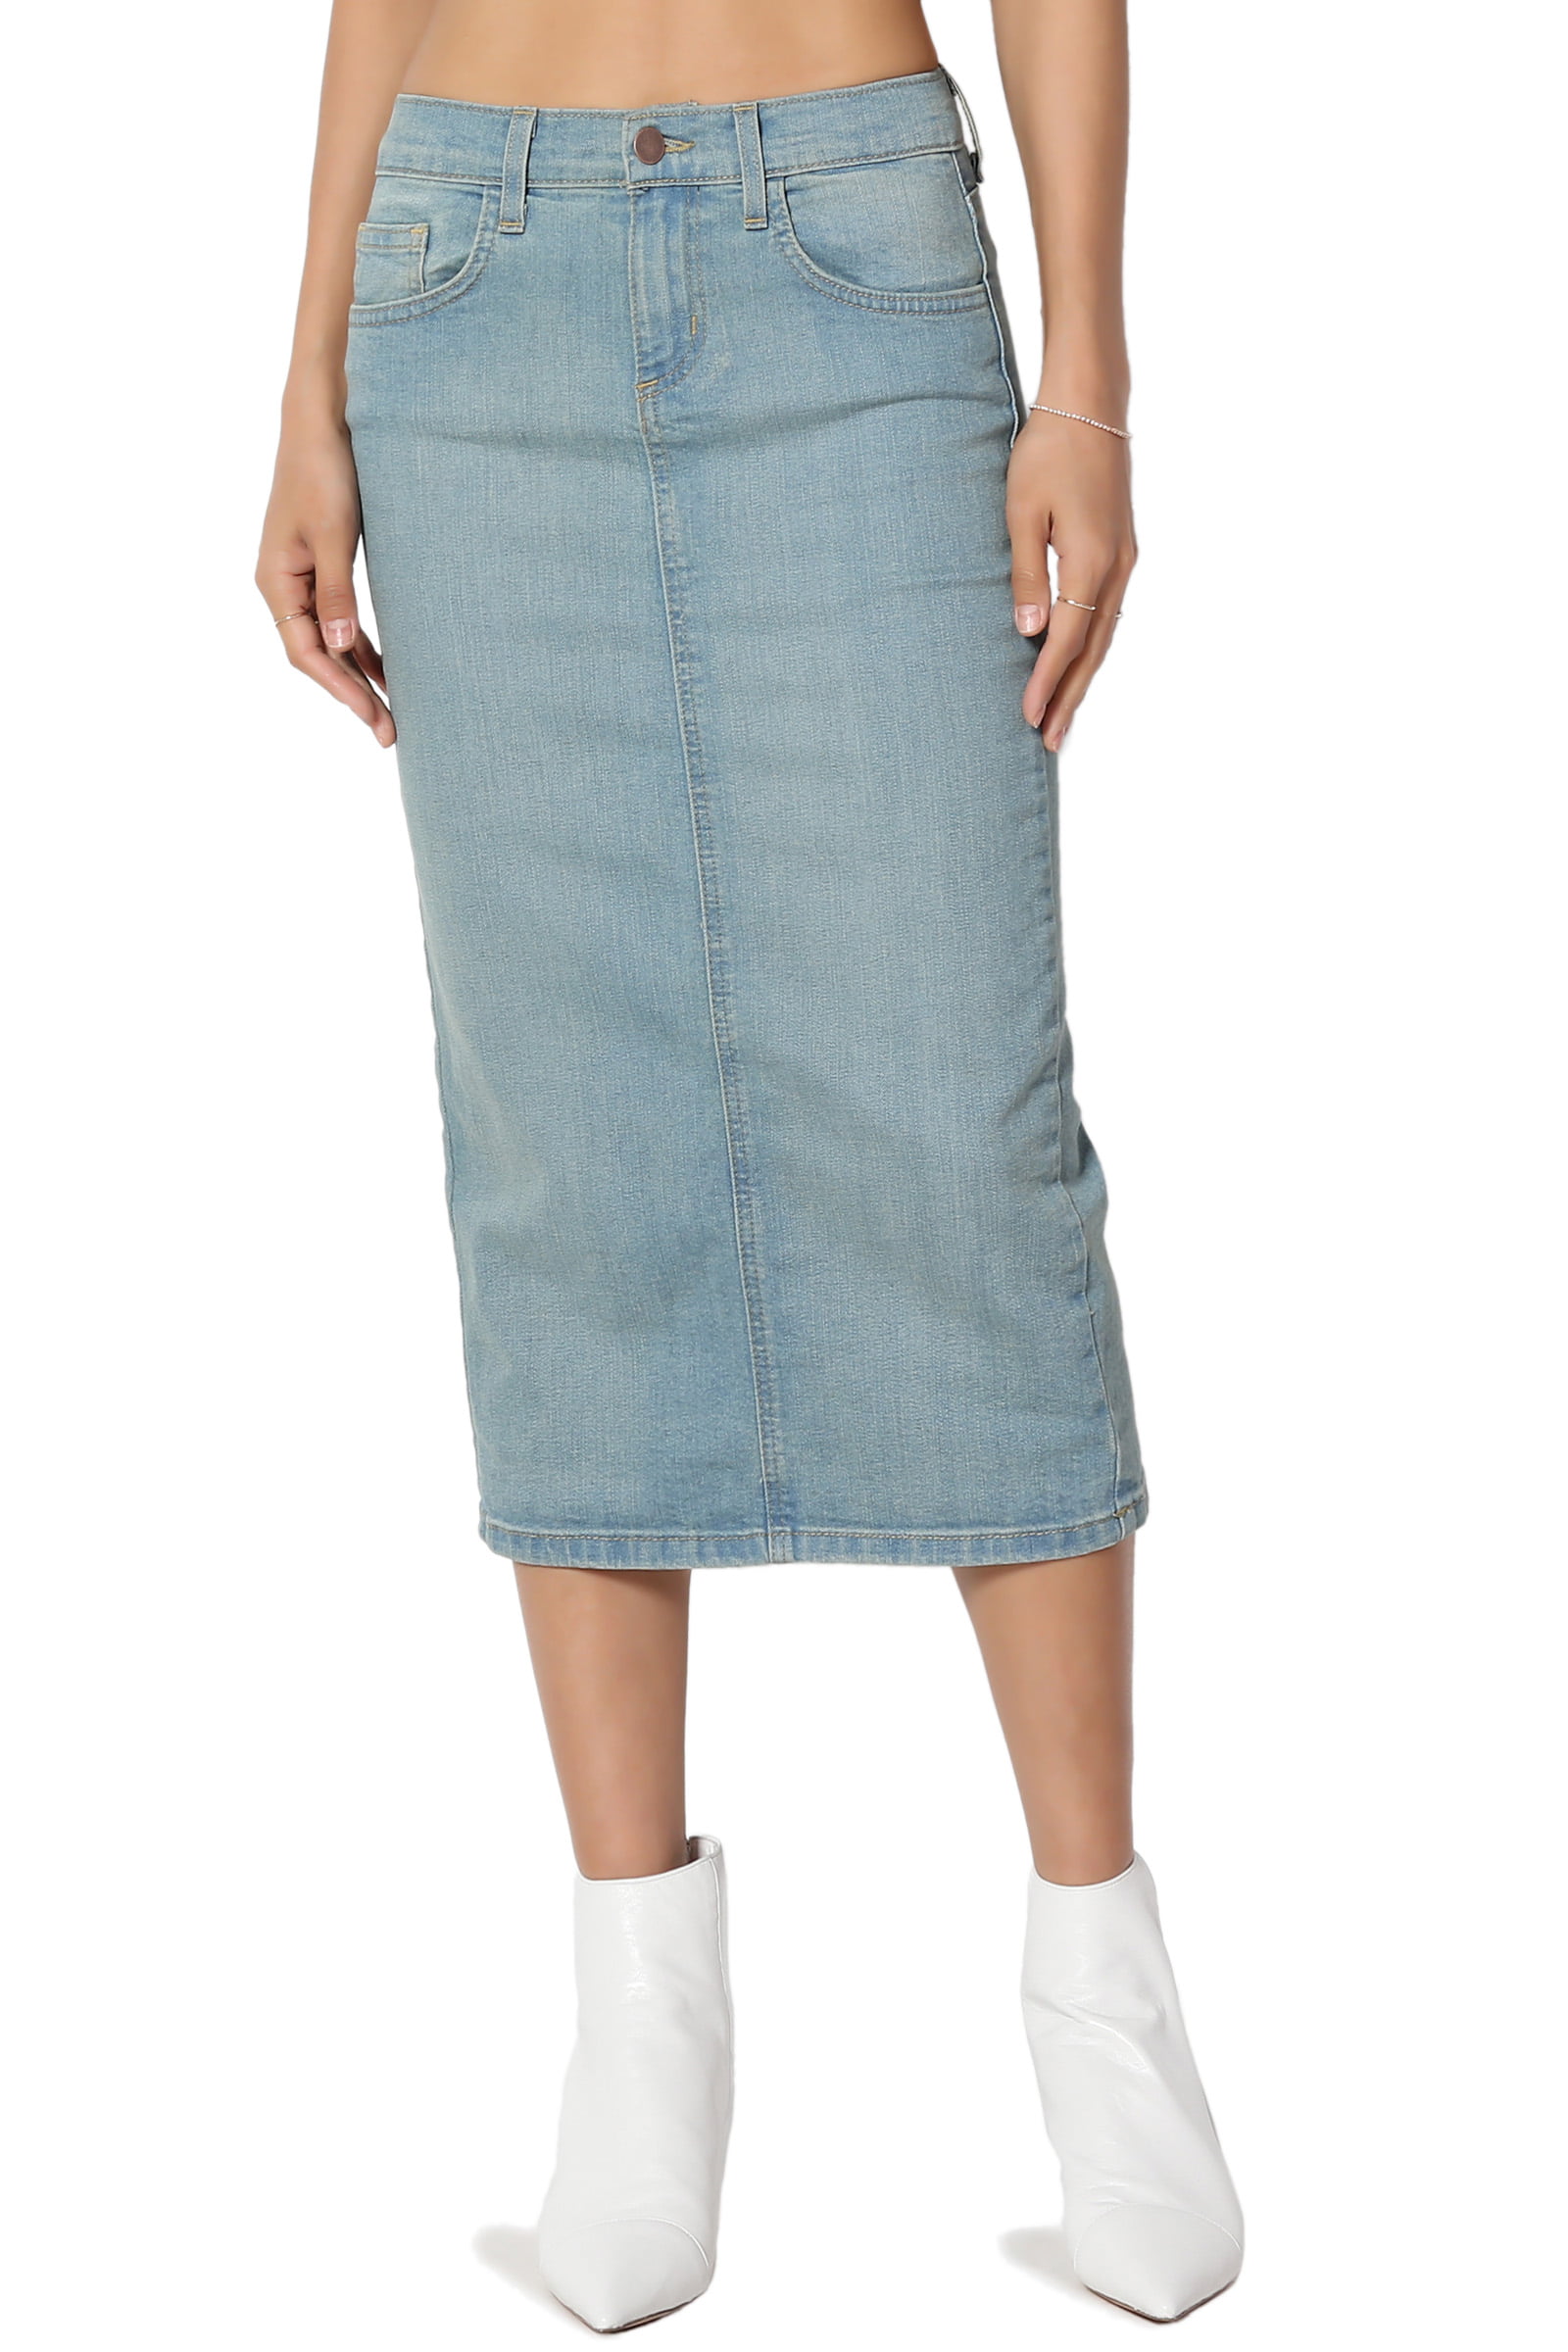 TheMogan Women's Vintage Washed Long And Lean Back Slit Mid Rise Denim ...